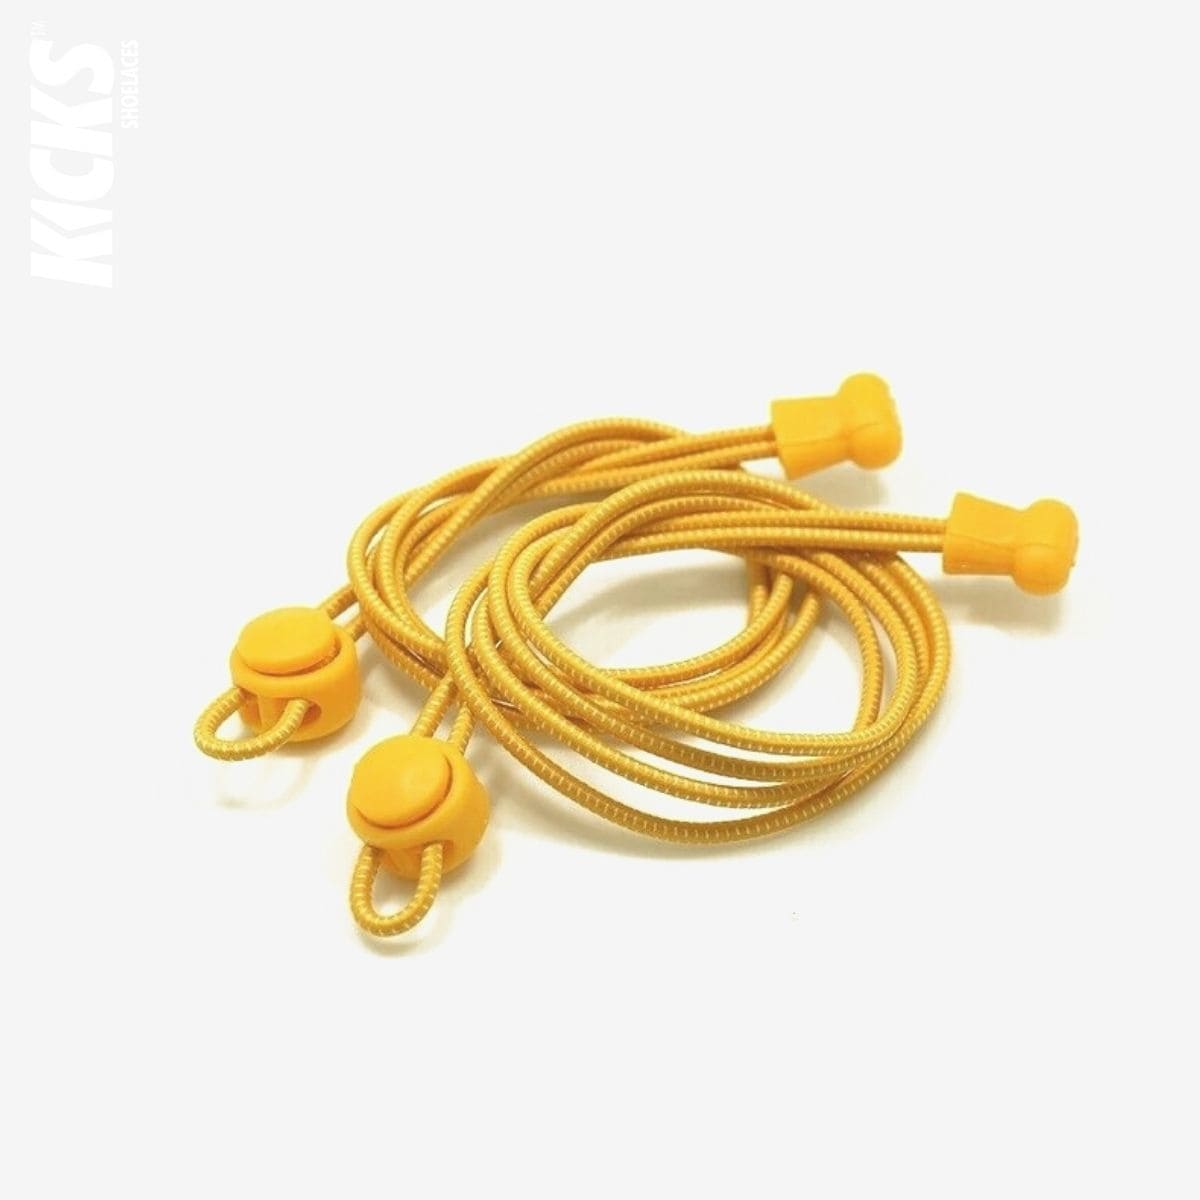 golden-yellow-no-tie elastic-running-shoelaces-with-matching-lace-locks-by-kicks-shoelaces